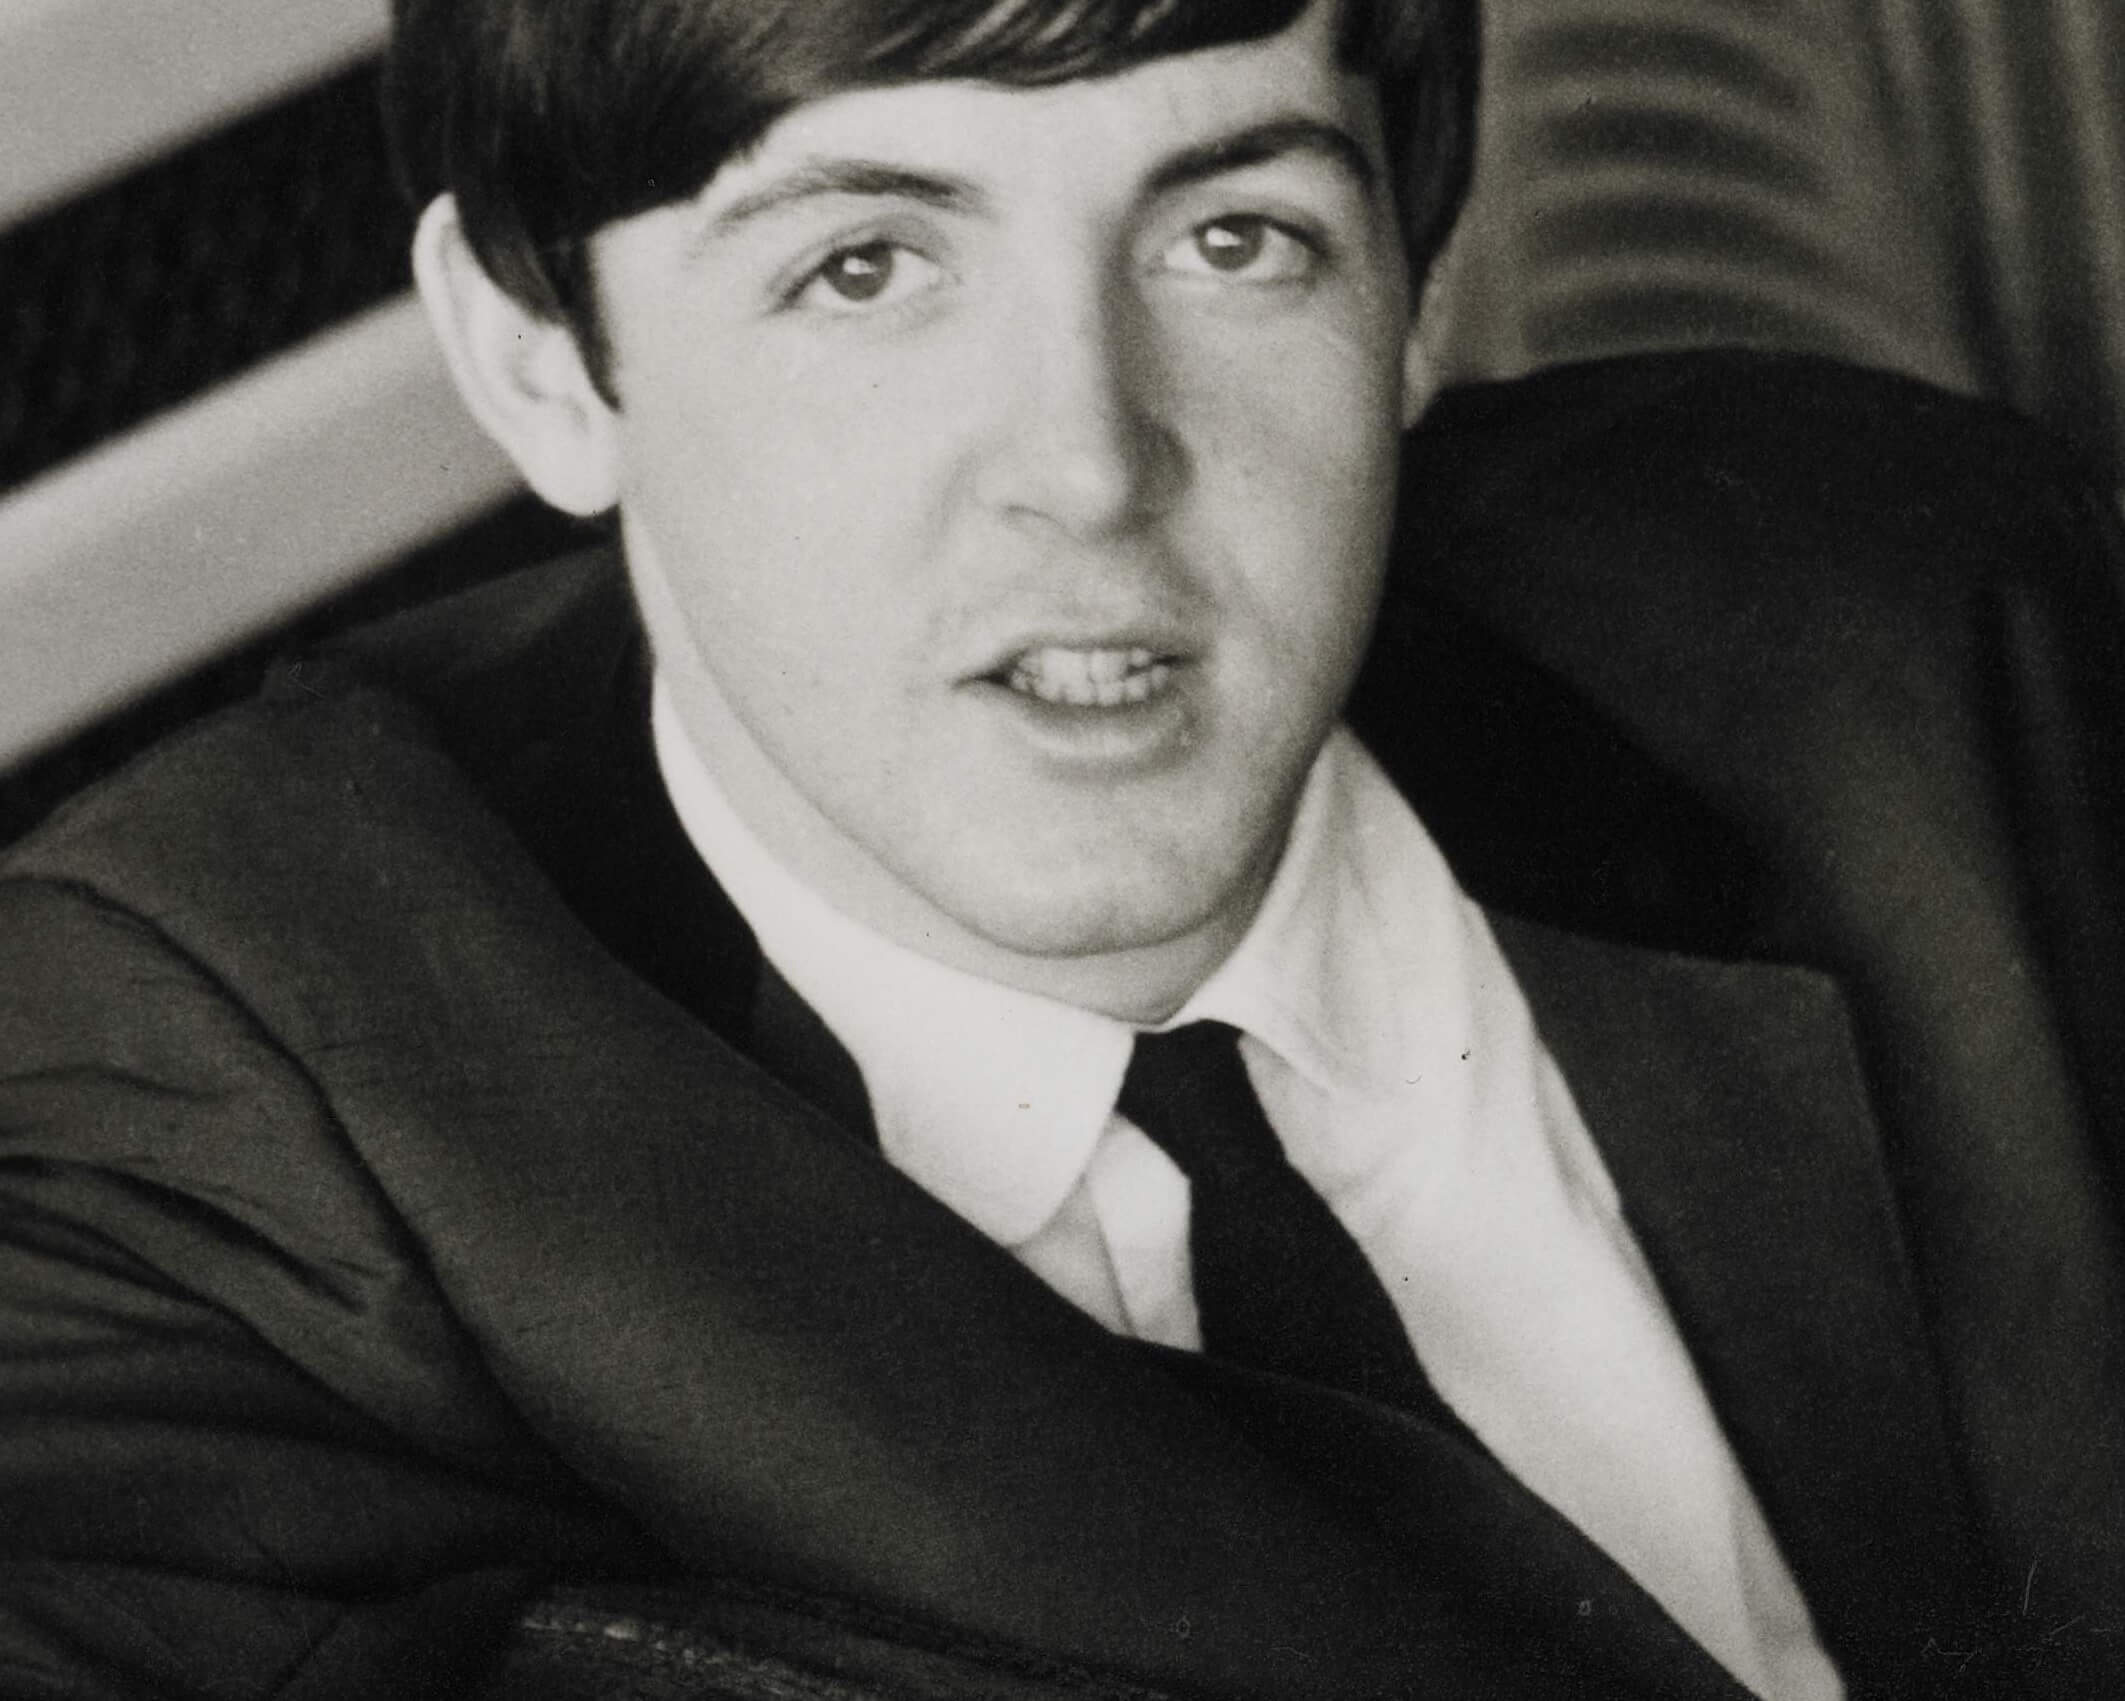 Paul McCartney Thought Up The Beatles' 'Yesterday' at a Movie Star's House